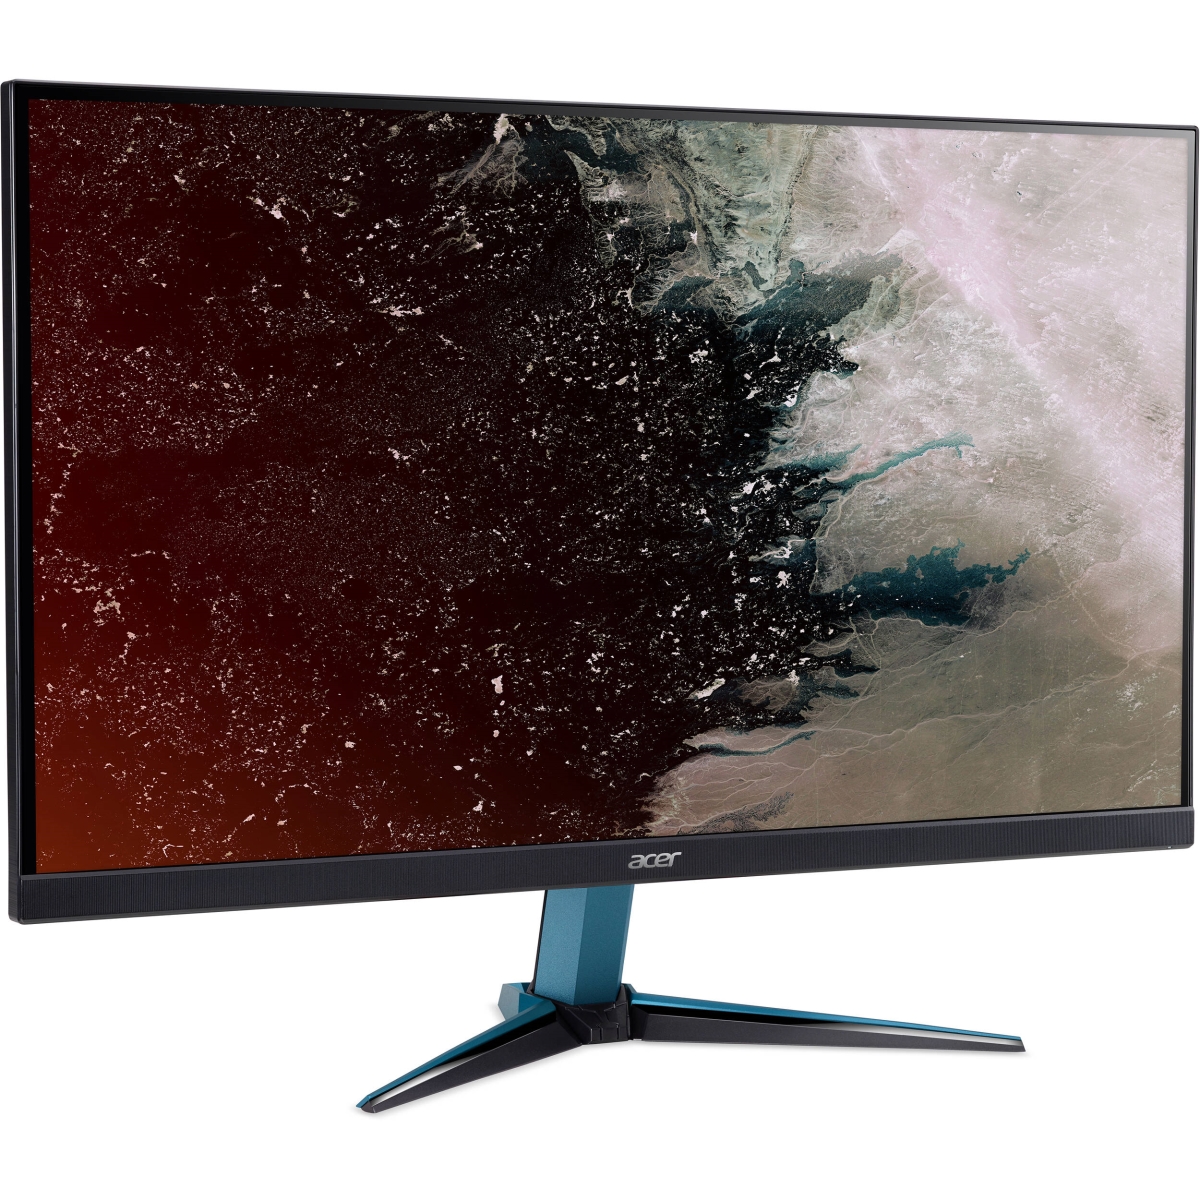 Picture of Acer America UM.HV1AA.S01 VG271U Sbmiipx 27 in. 16-9 FreeSync 170 Hz QHD HDR IPS Gaming Monitor - 3 Year